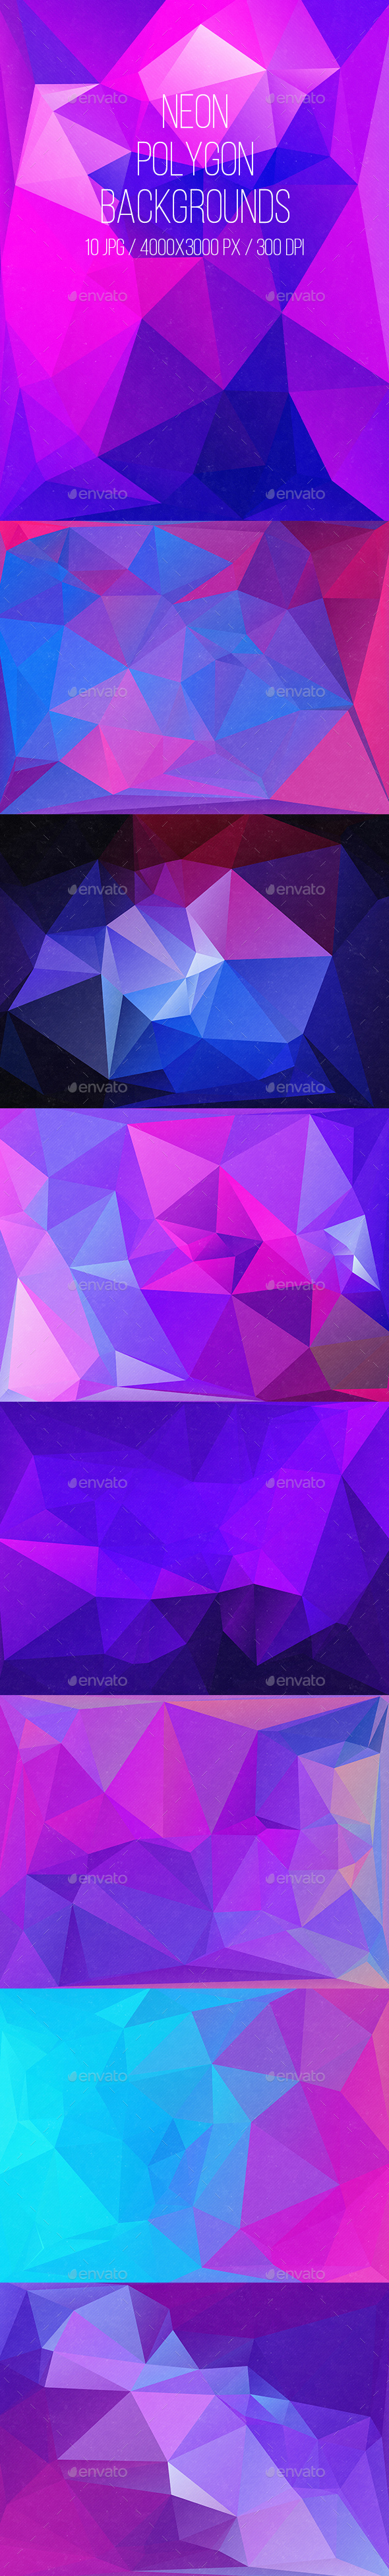 Neon Polygon Backgrounds